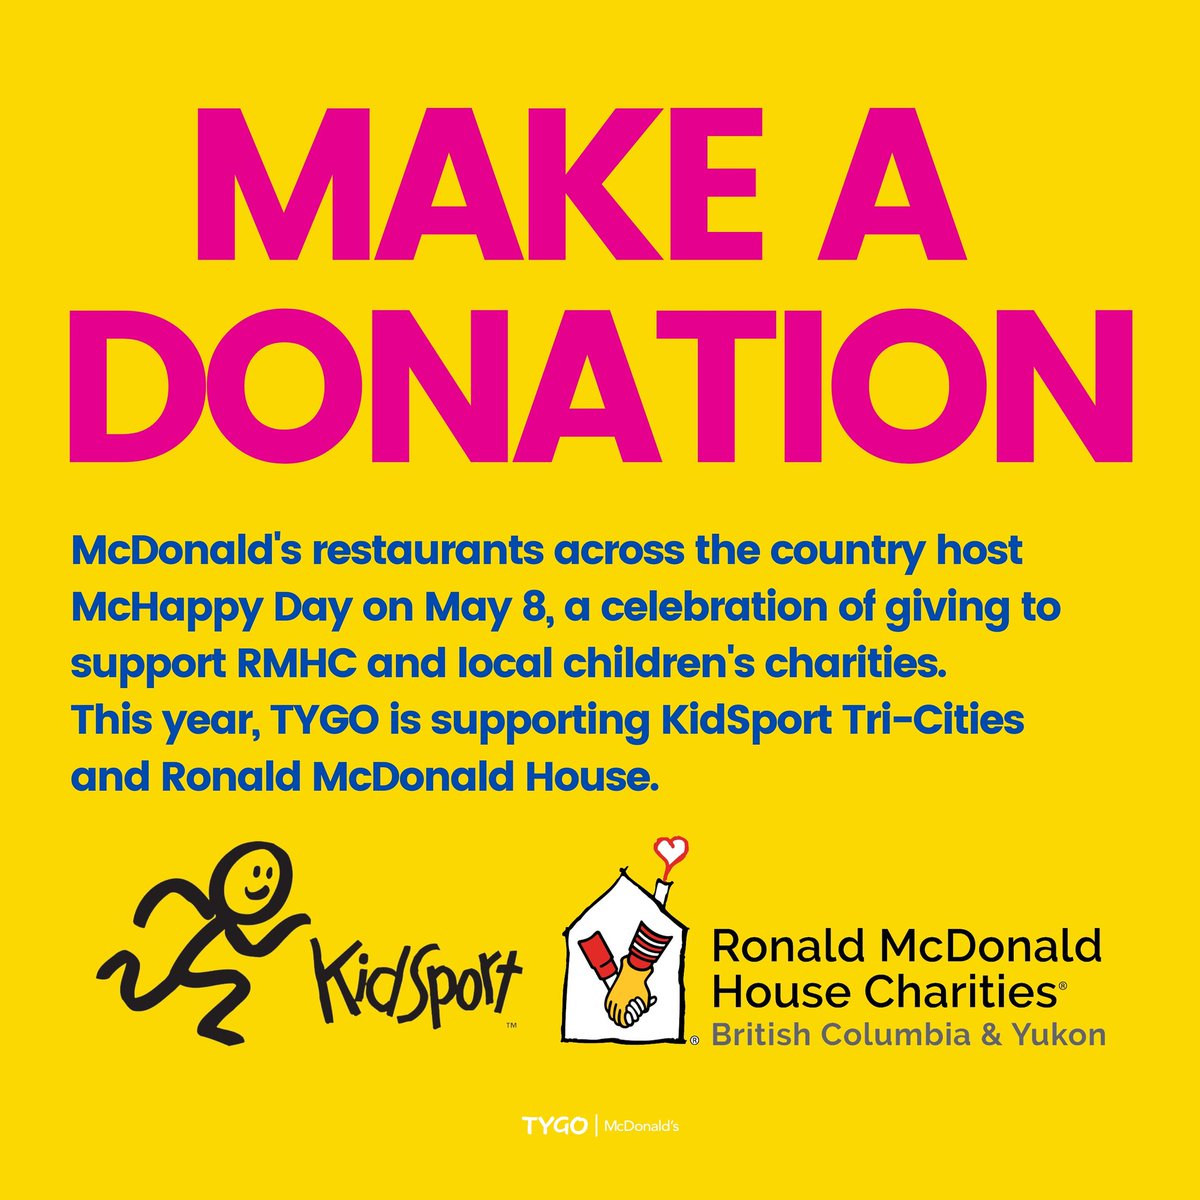 Today is McHappy Day & we will be helping at three McDonalds Restaurants from 4-6PM to raise money for KidSport Tri-Cities & Ronald McDonald House. Players & staff will be at 1131 Austin Heights, 1095 Woolridge & 515 North Road locations. TYGO Enterprises Ltd. | McDonalds.